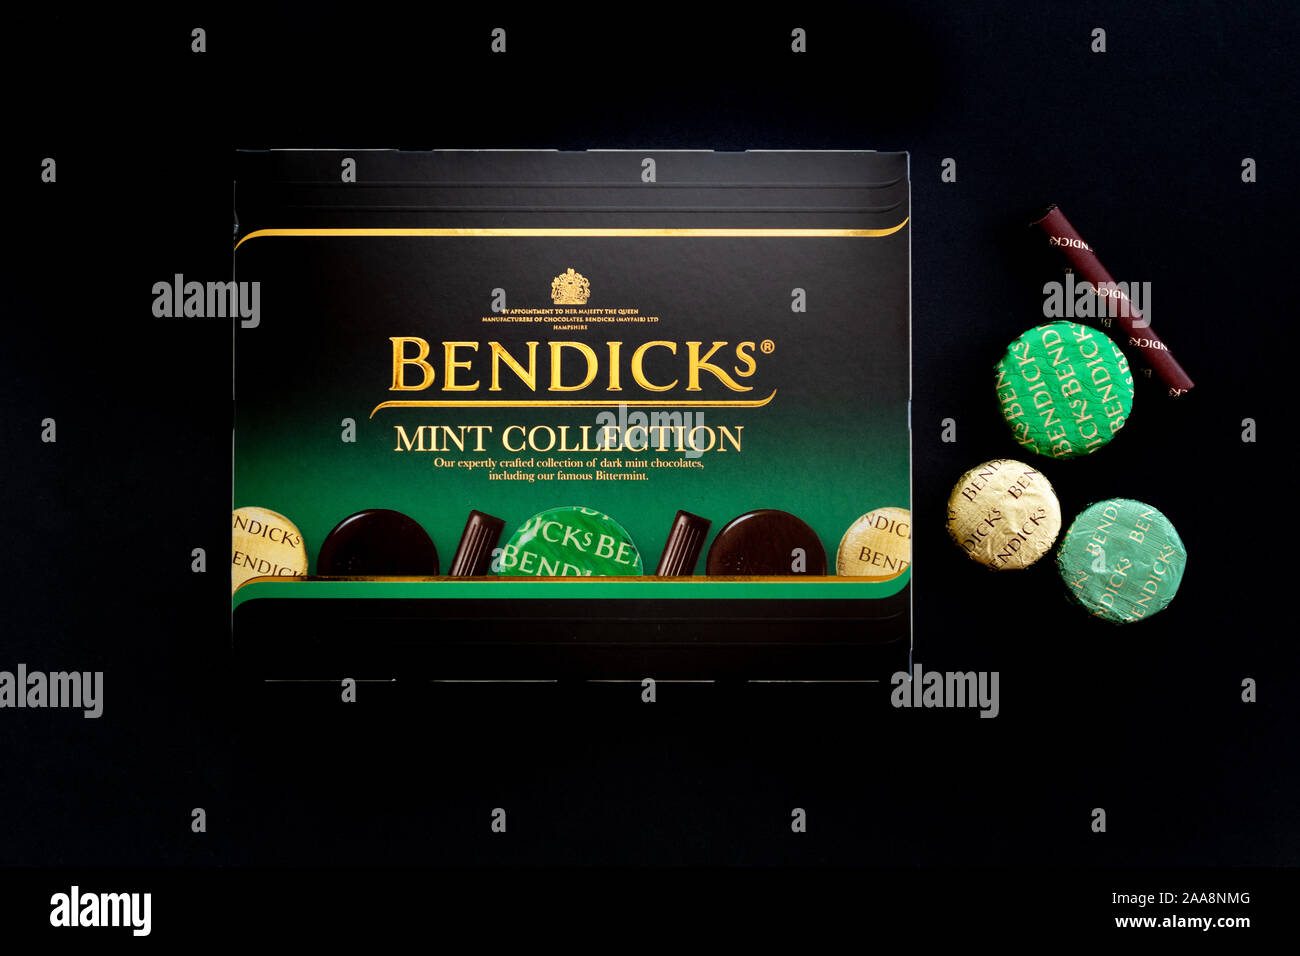 Bendicks Mint Collection - box and mints on black background Stock Photo